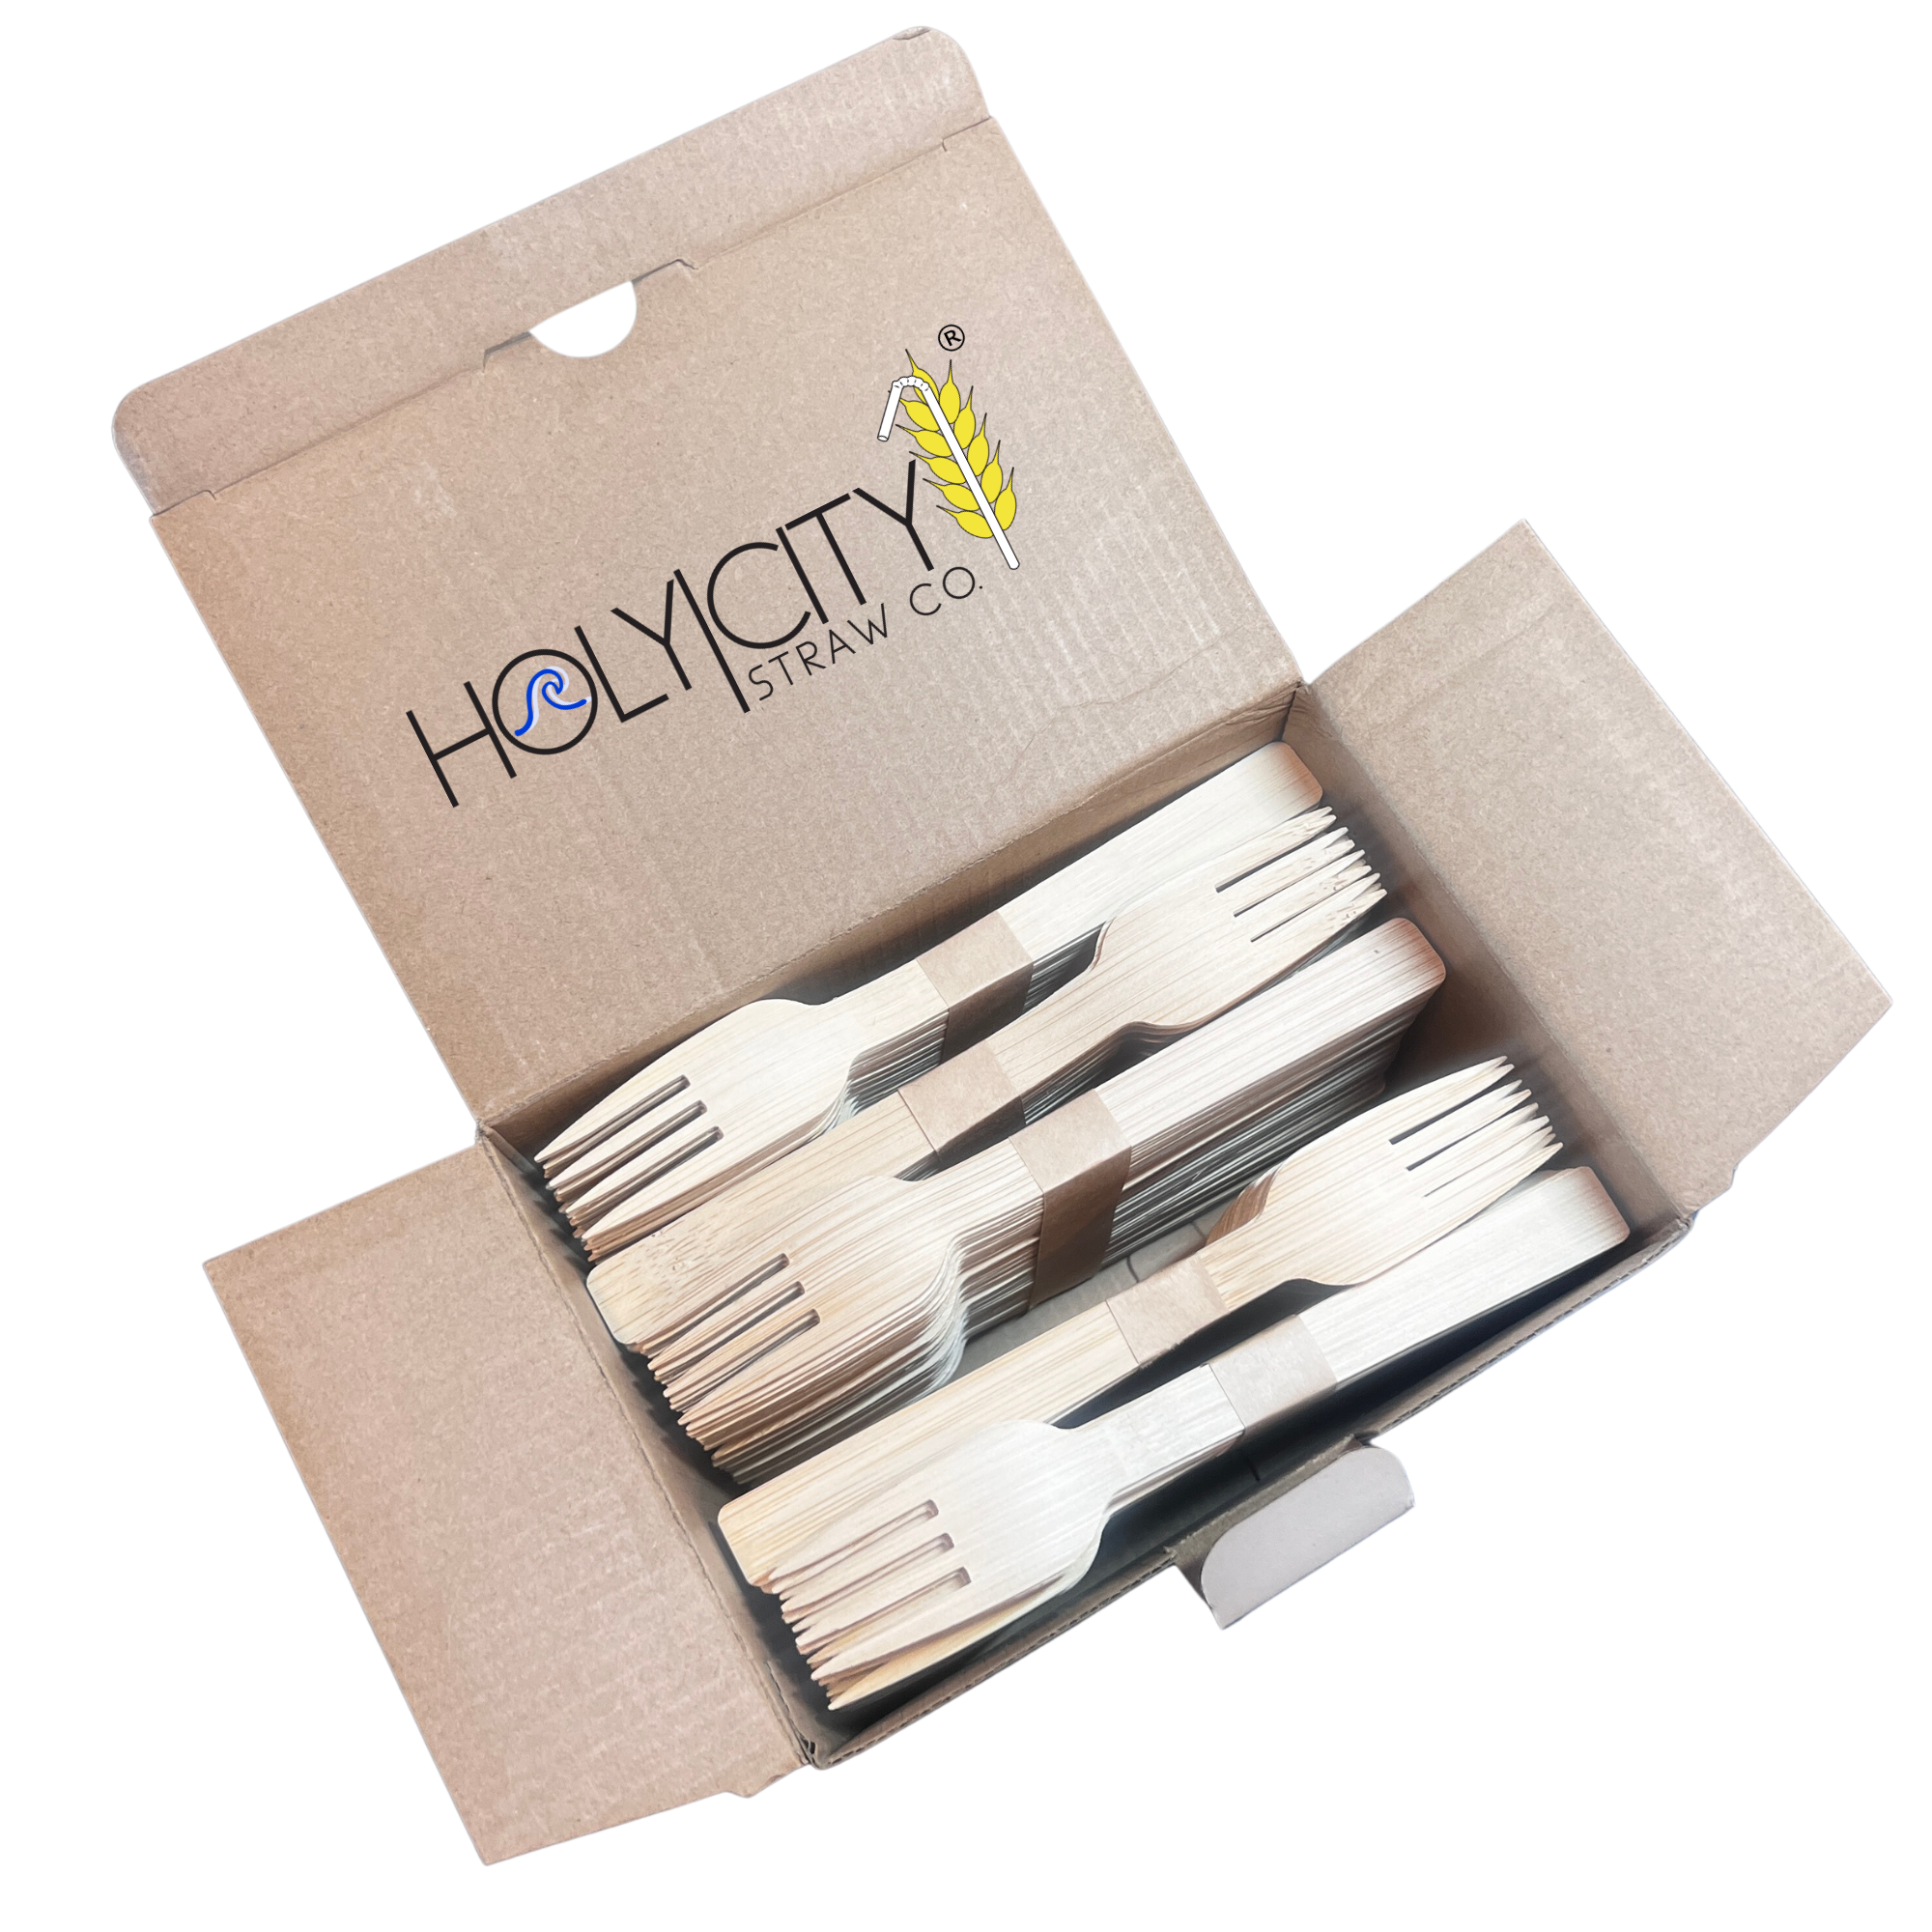 Holy City Straw Co. 250 count Open box containing unwrapped bamboo forks neatly stacked inside.